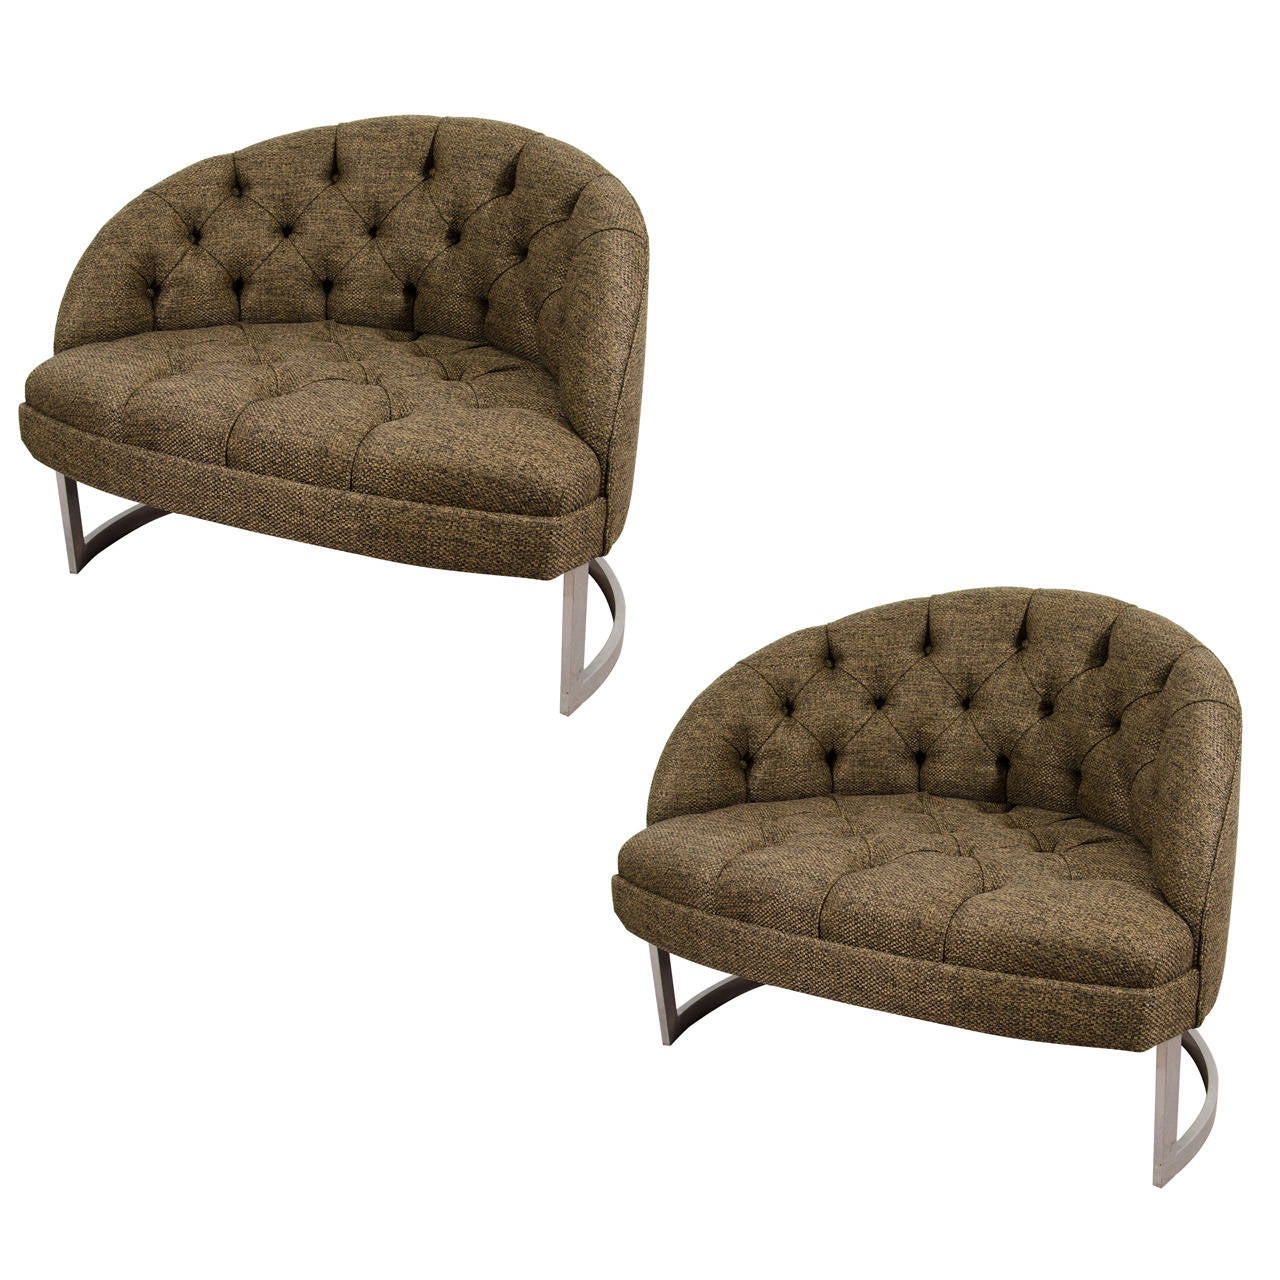 Wonderful Pair of Monumental Milo Baughman Barrel Back Lounge Chairs For Sale